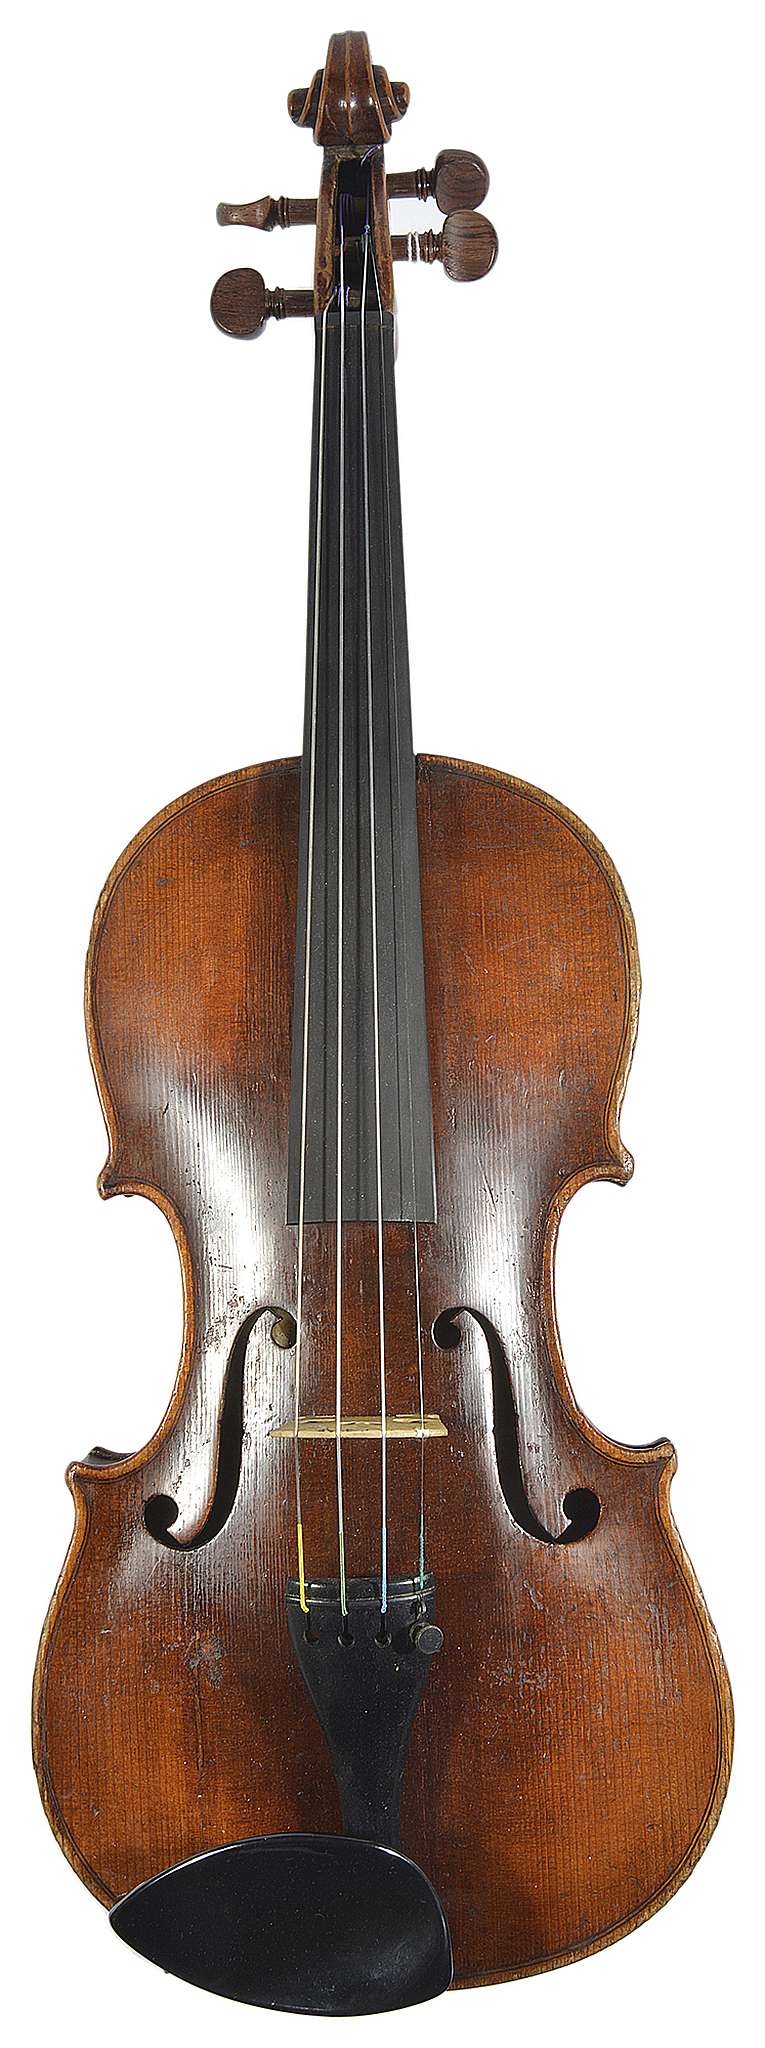 A German violin c.1910, (Karl ad Fritsche, Zitau), with E string, fine tuner on ebony tail piece and